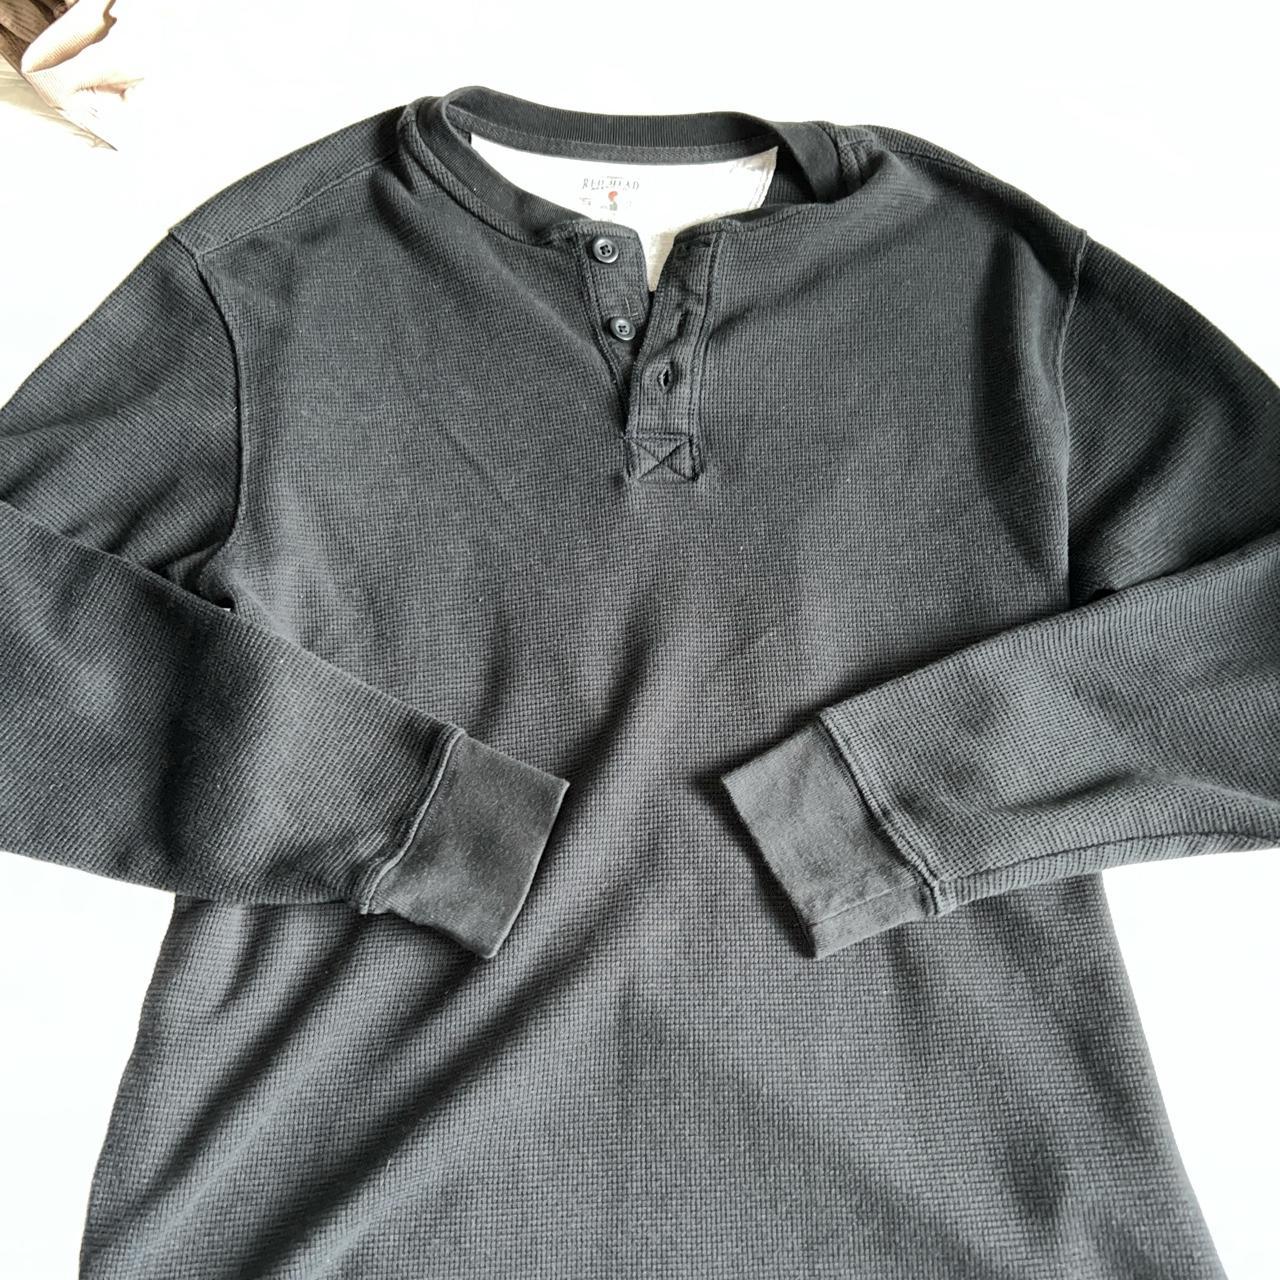 Duck and Cover Men's Black Shirt